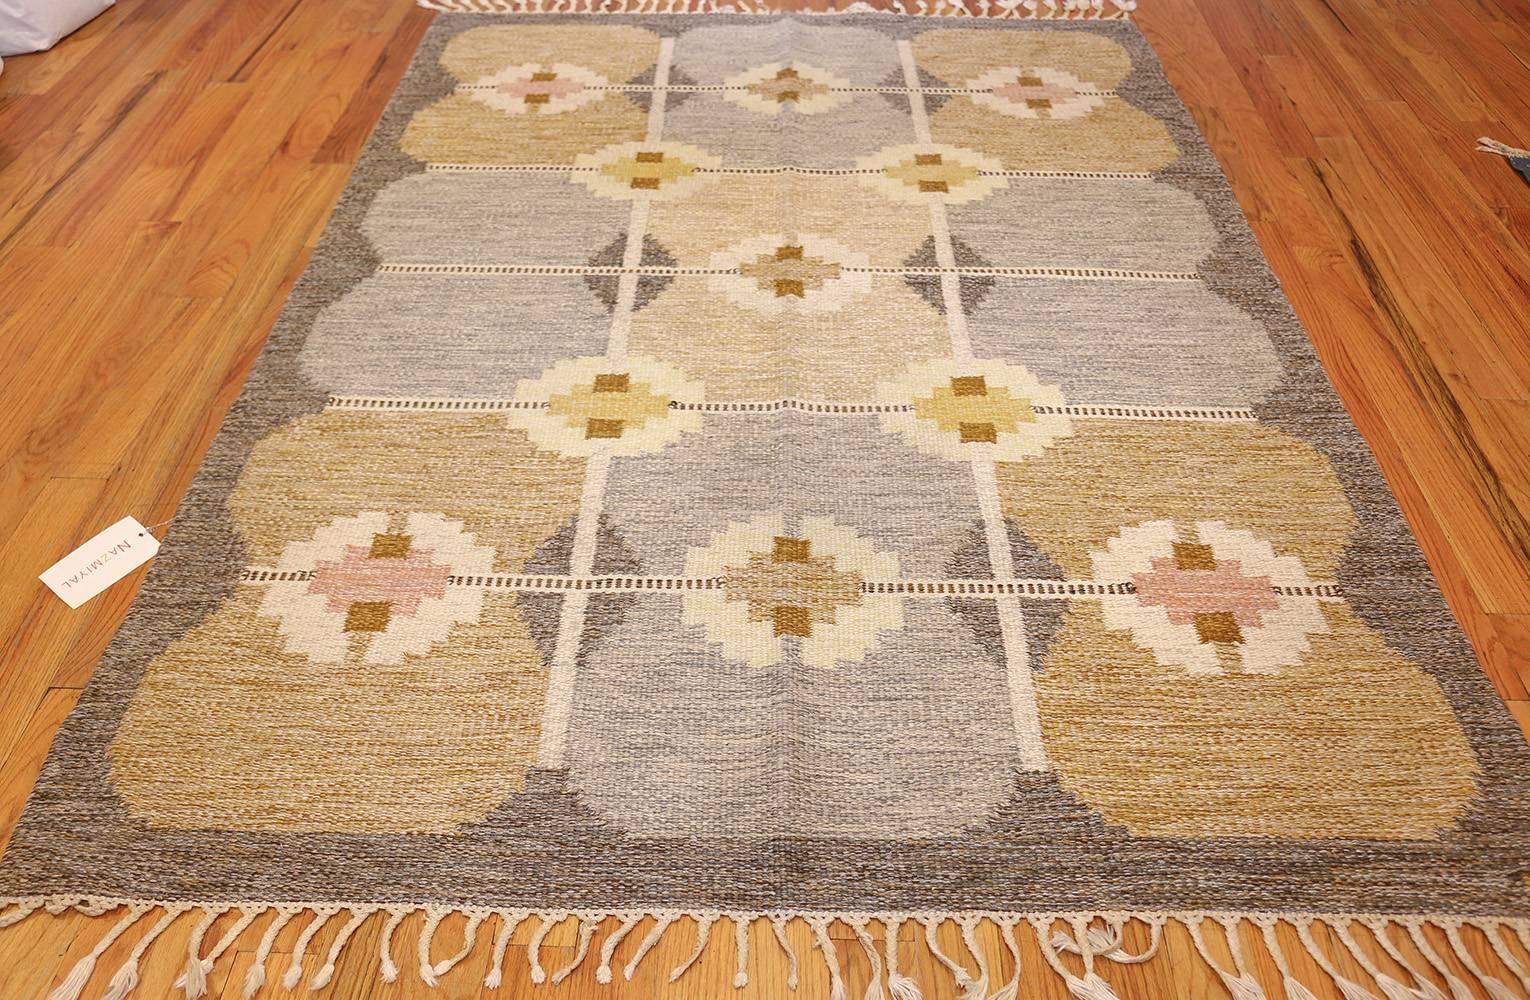 Hand-Woven Vintage Swedish Kilim by Ingegerd Silow. Size: 5 ft 5 in x 7 ft 6 in 